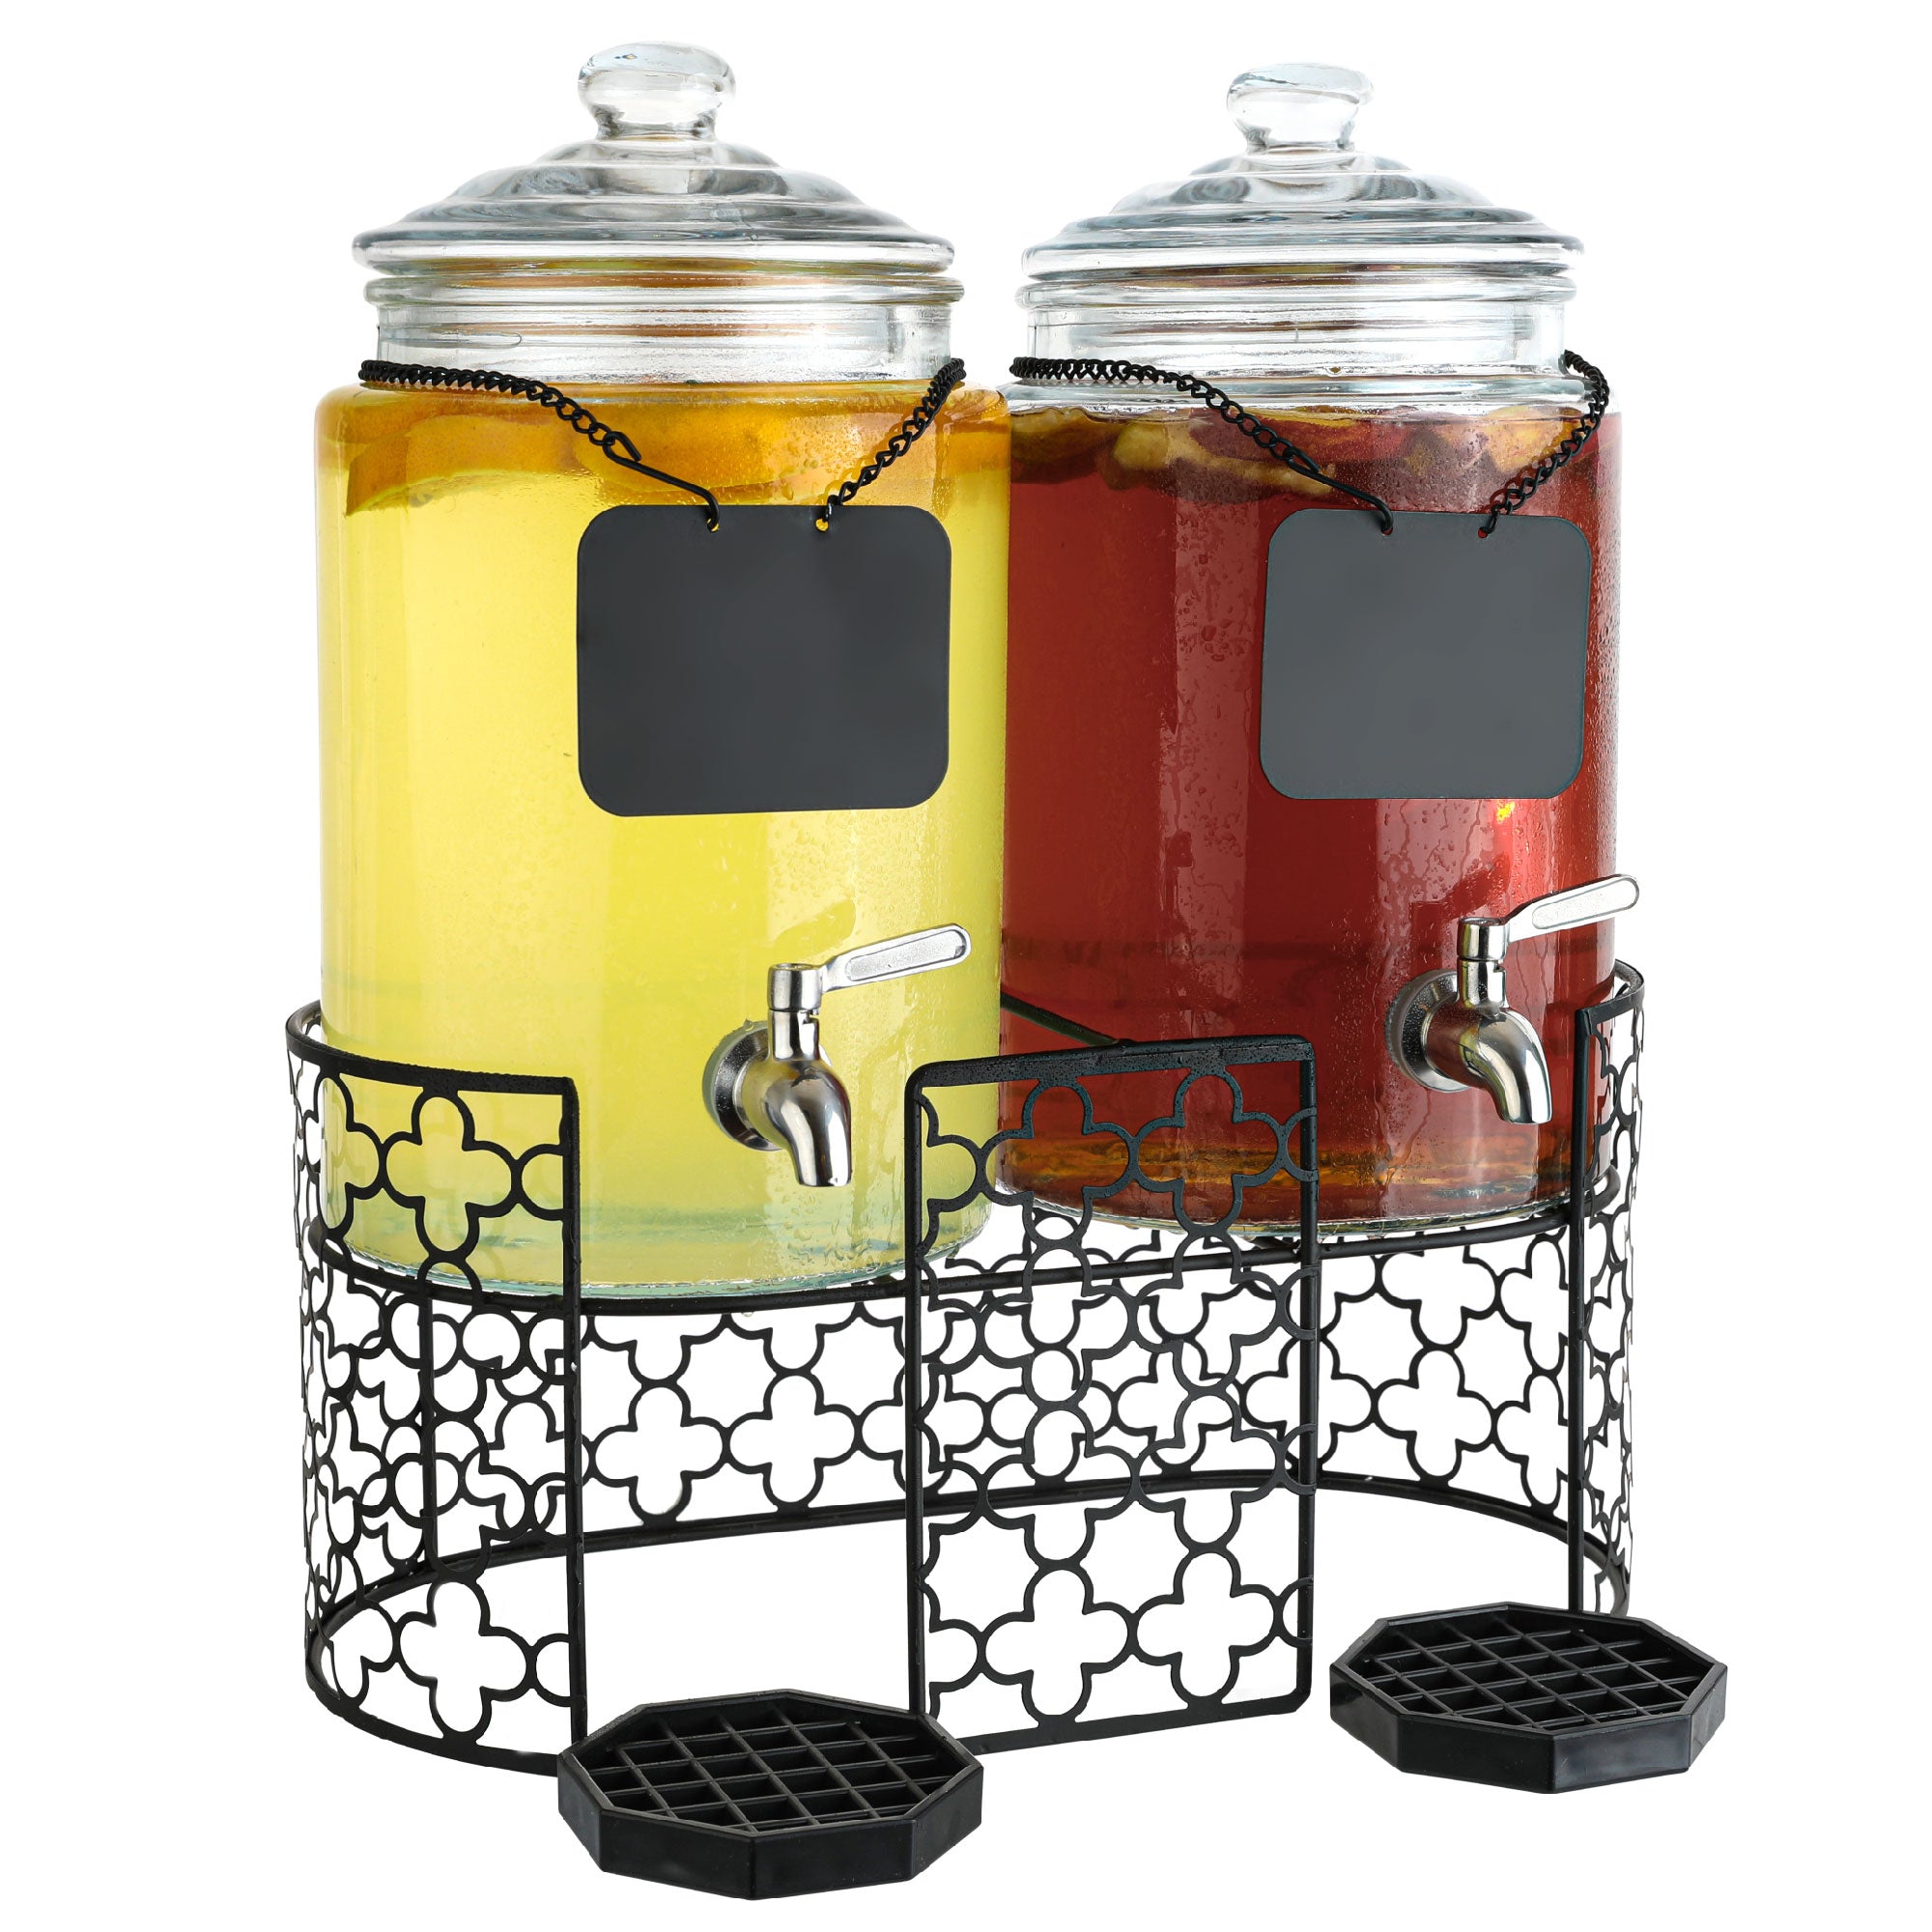 Quality Glass Twin Ice Cold Beverage Dispensers On Galvanized Stand /  Bucked 1.5 Gallon Each Jug